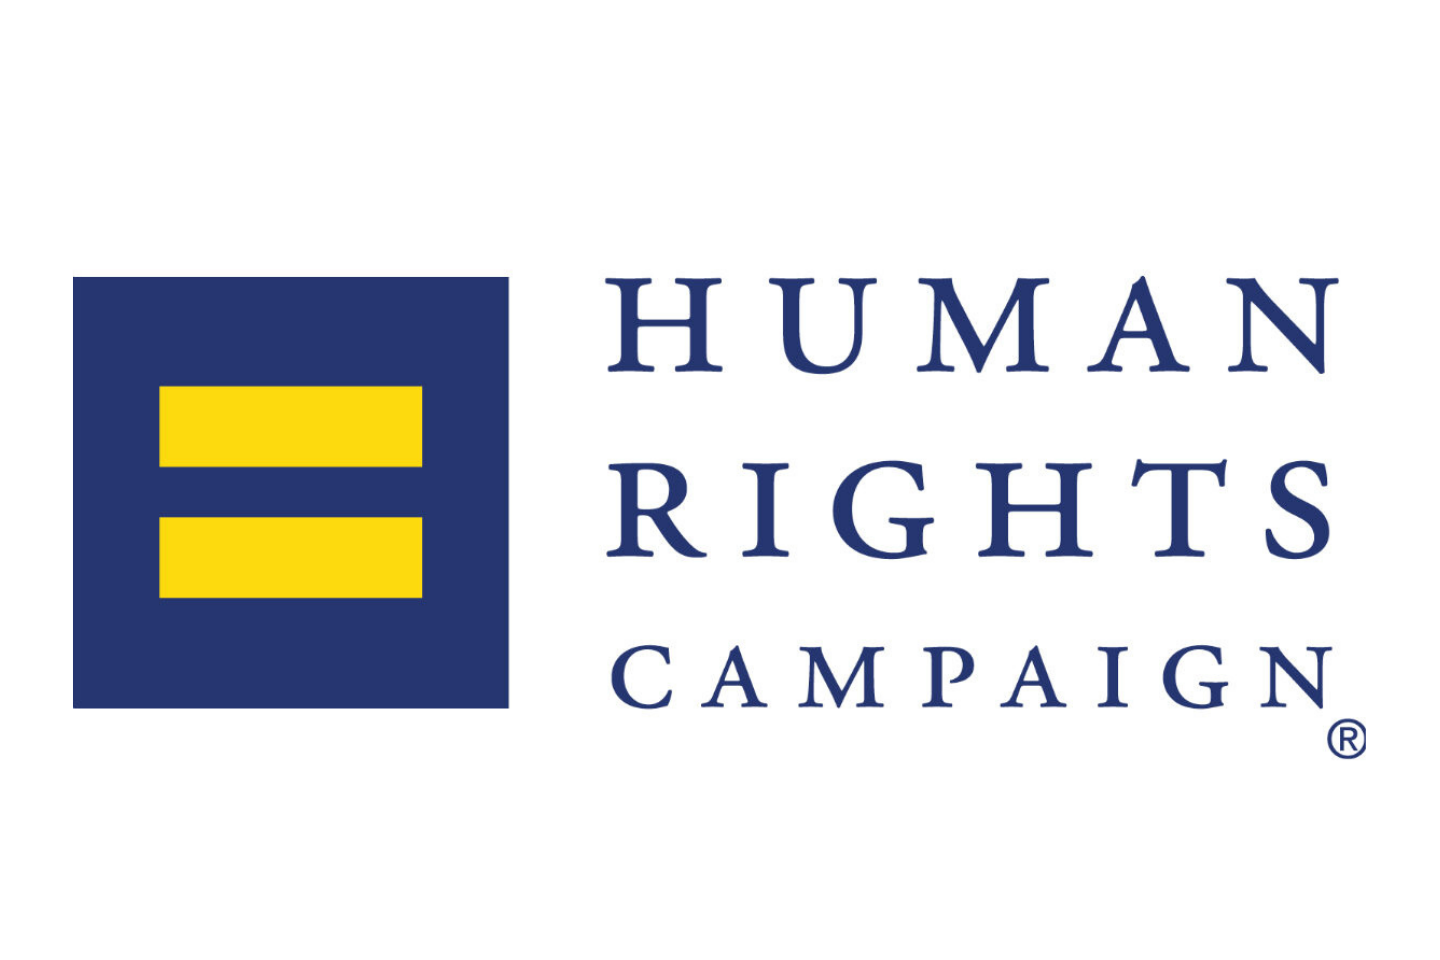 LGBTQ Organization Human Rights Campaign To Honor Jean Smart and Sterling K. Brown